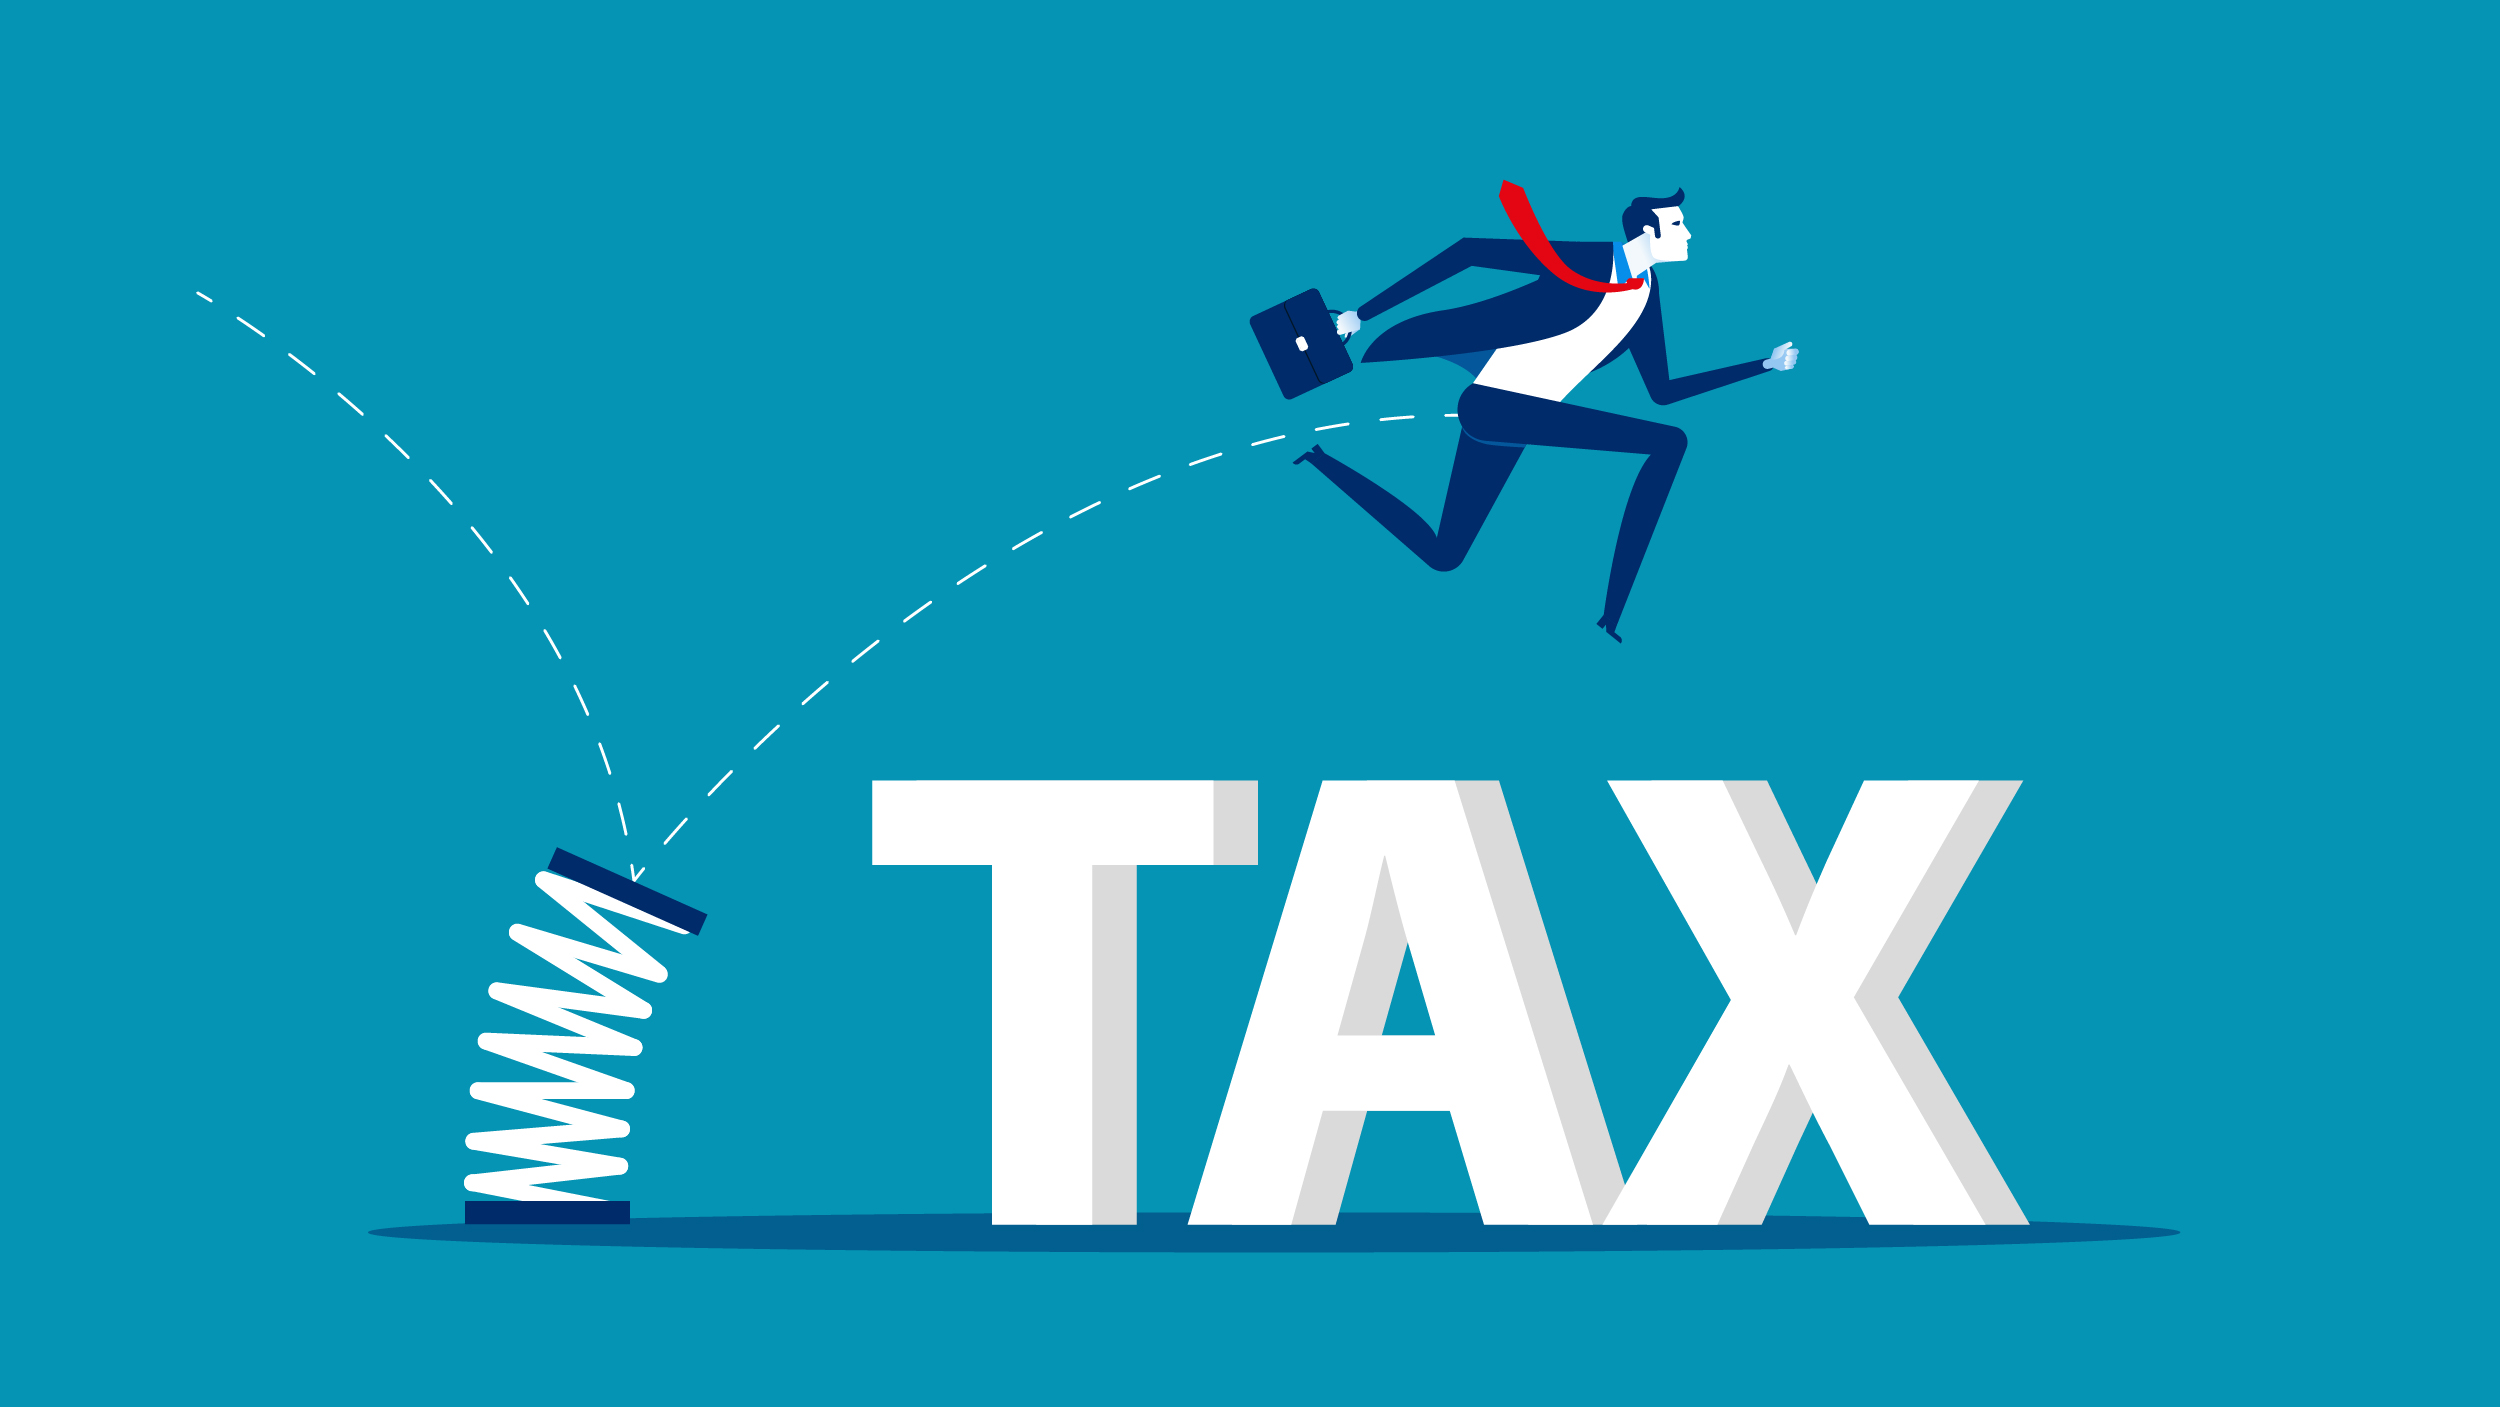 Excess Profits Tax Proposals Meet the Moment, But Lawmakers Should Keep Their Eye on Fundamentally Fixing Our Corporate Tax